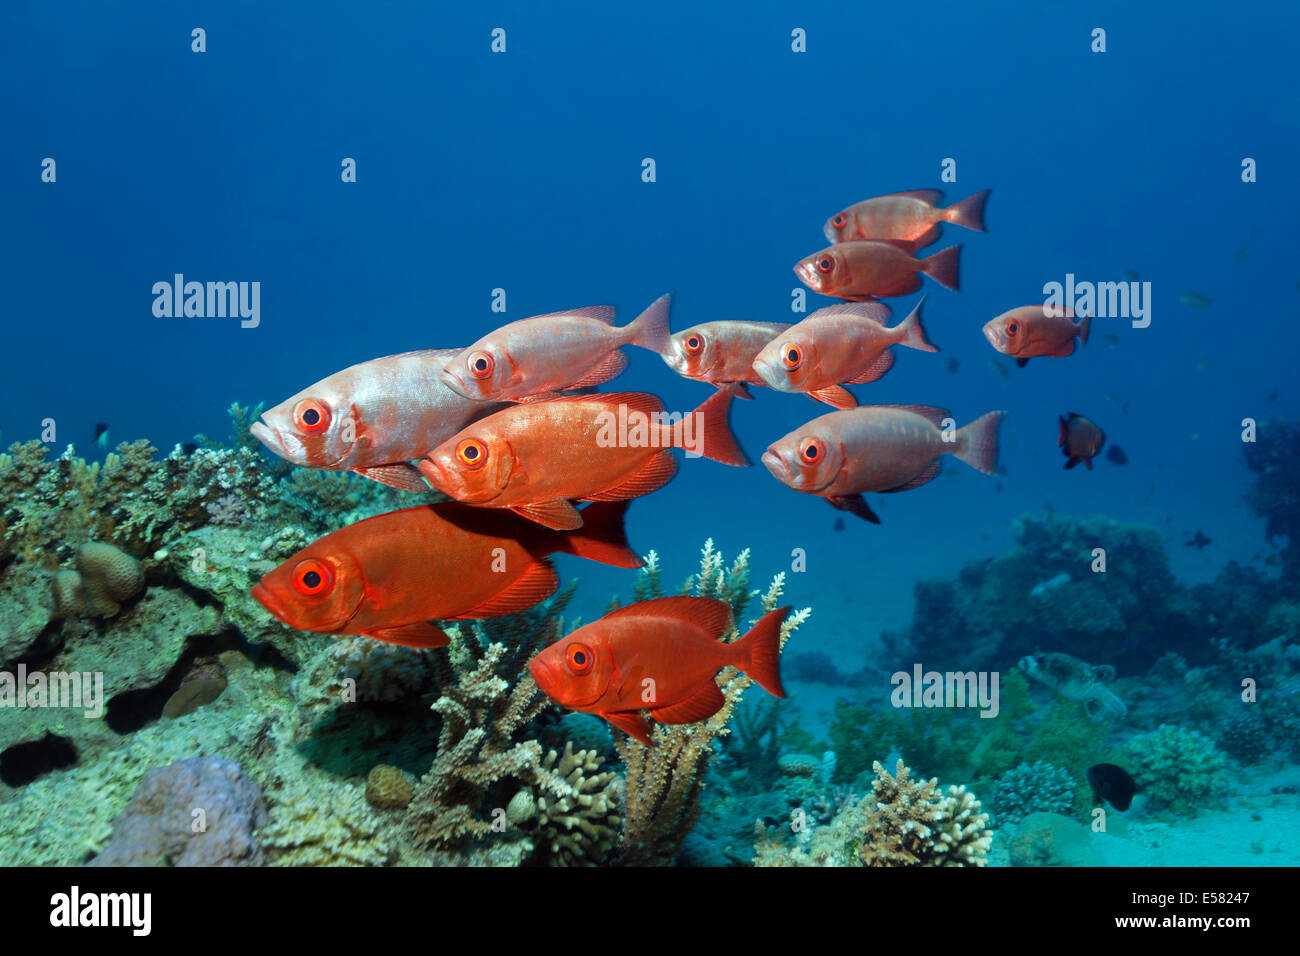 Shoal lunar-tailed bigeye (Priacanthus hamrur) over coral reef, Red Sea, Egypt Stock Photo